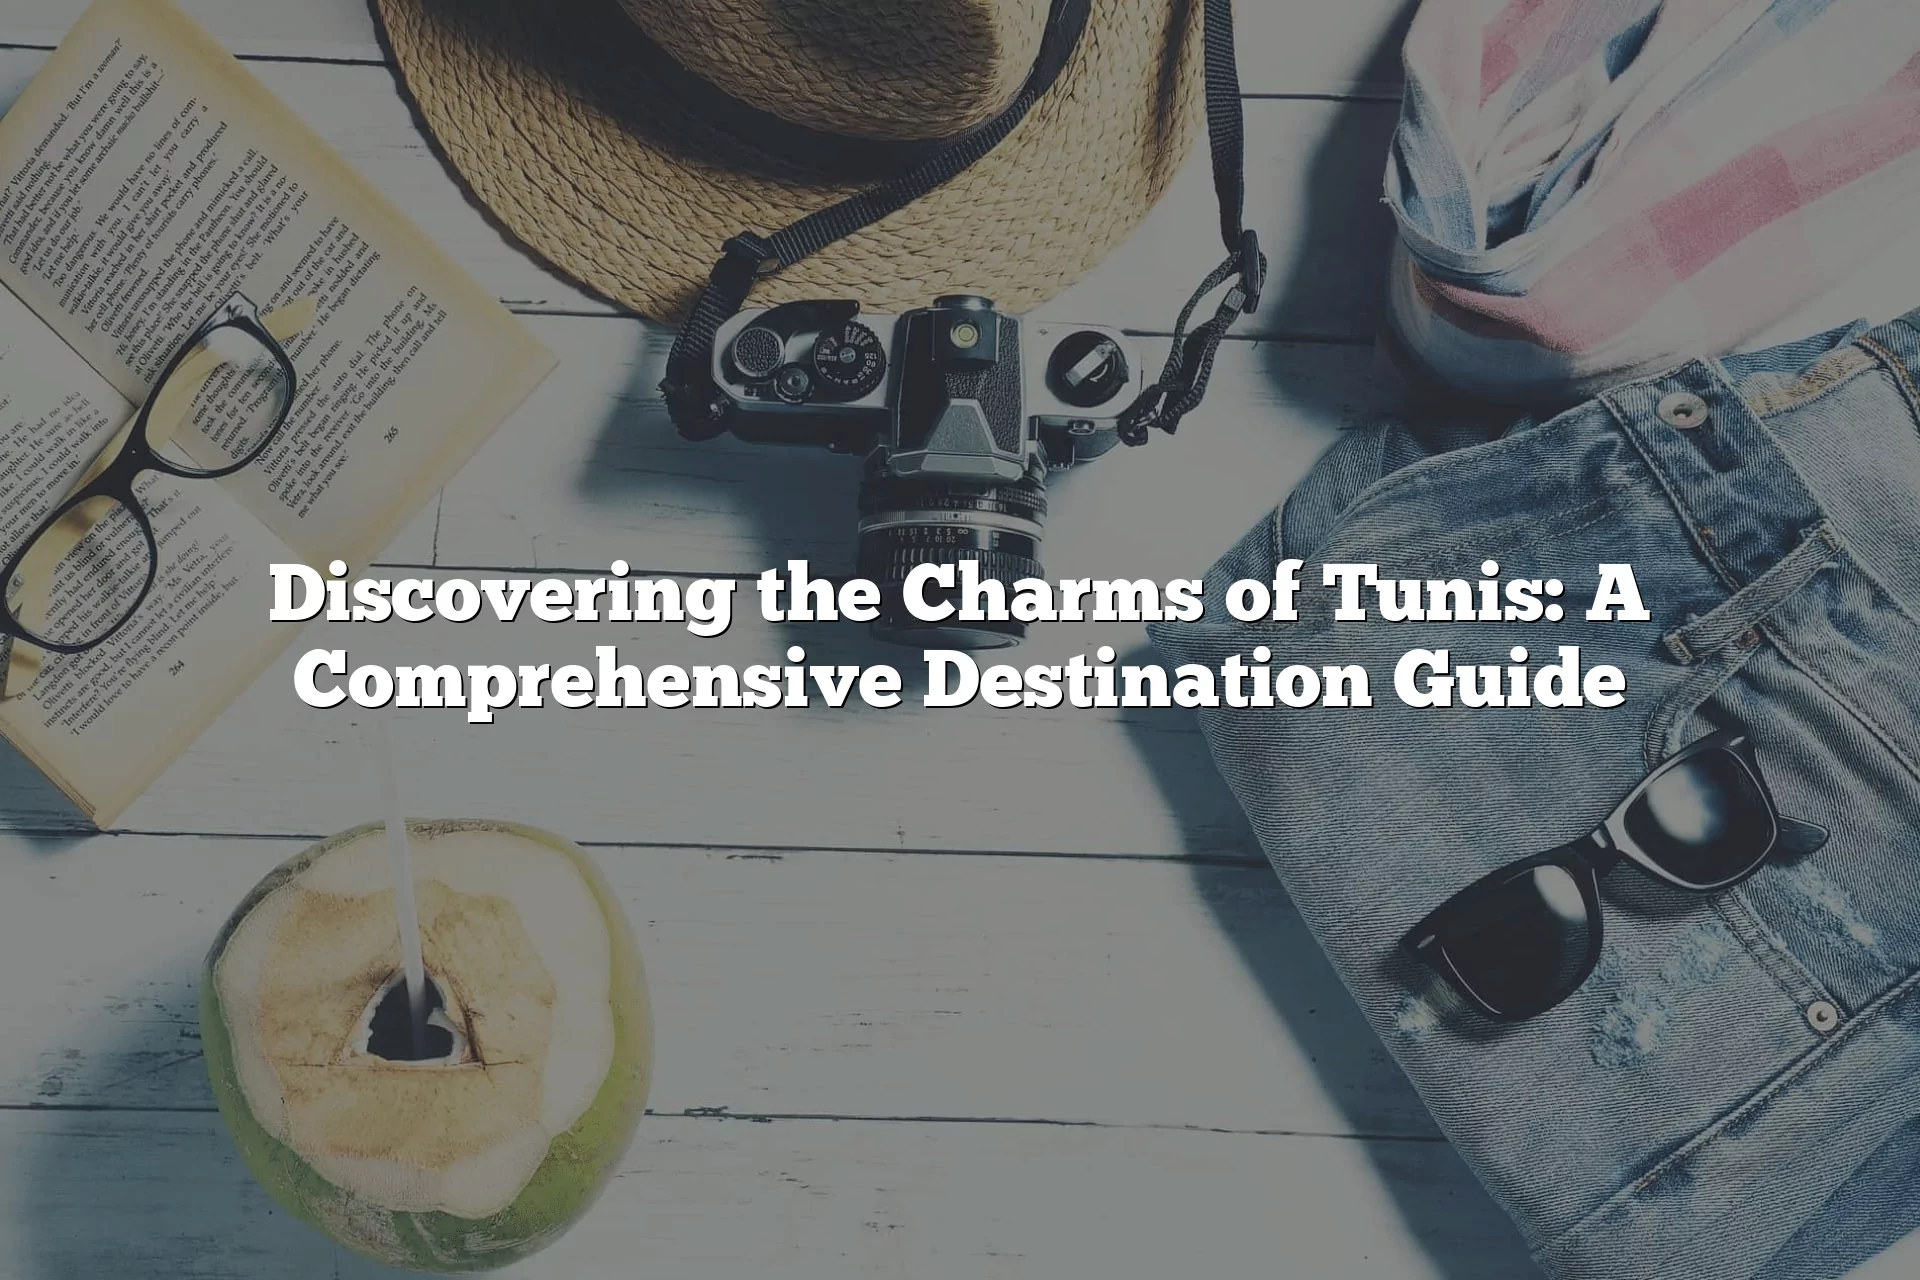 Discovering the Charms of Tunis: A Comprehensive Destination Guide